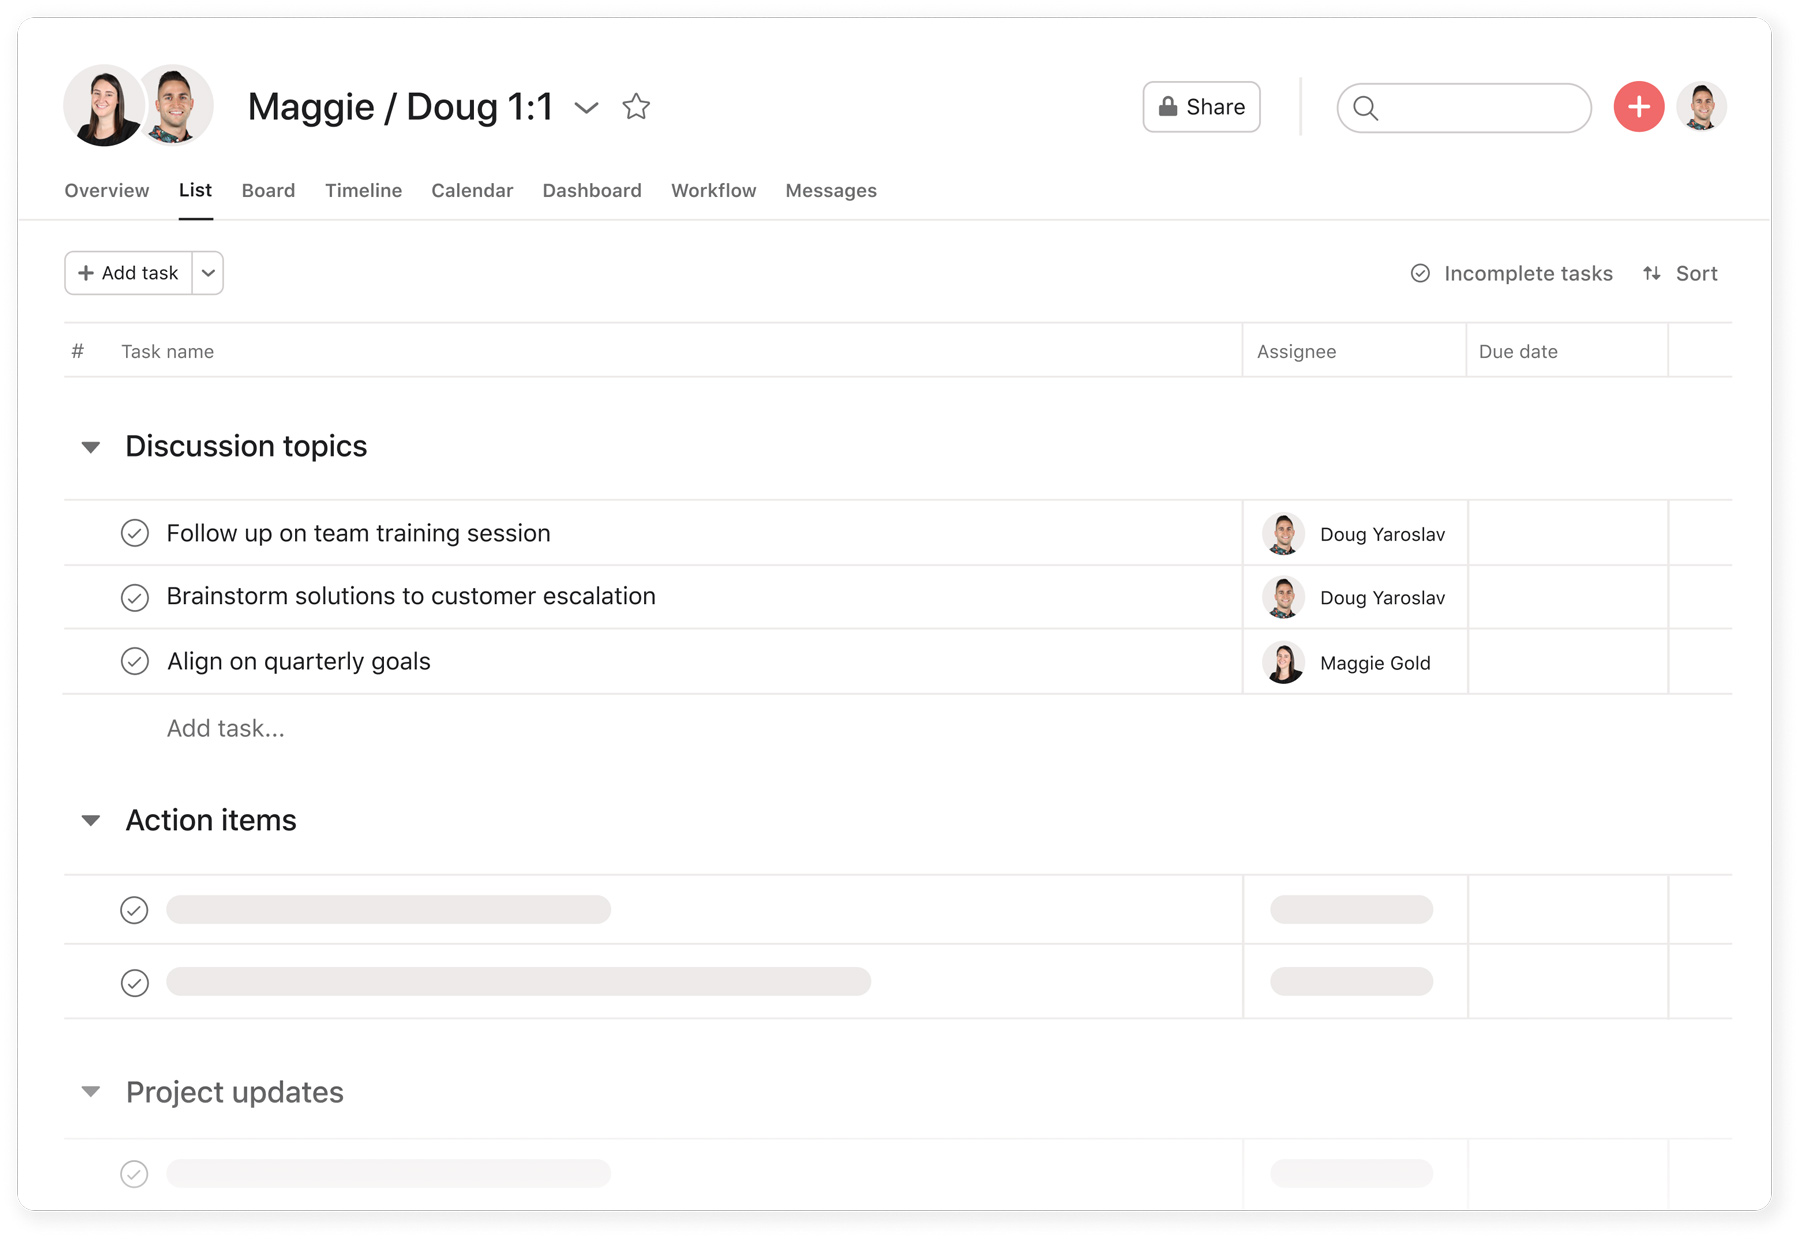 [product ui] 1:1 meeting agenda project in Asana with discussion topics and action items (list view)